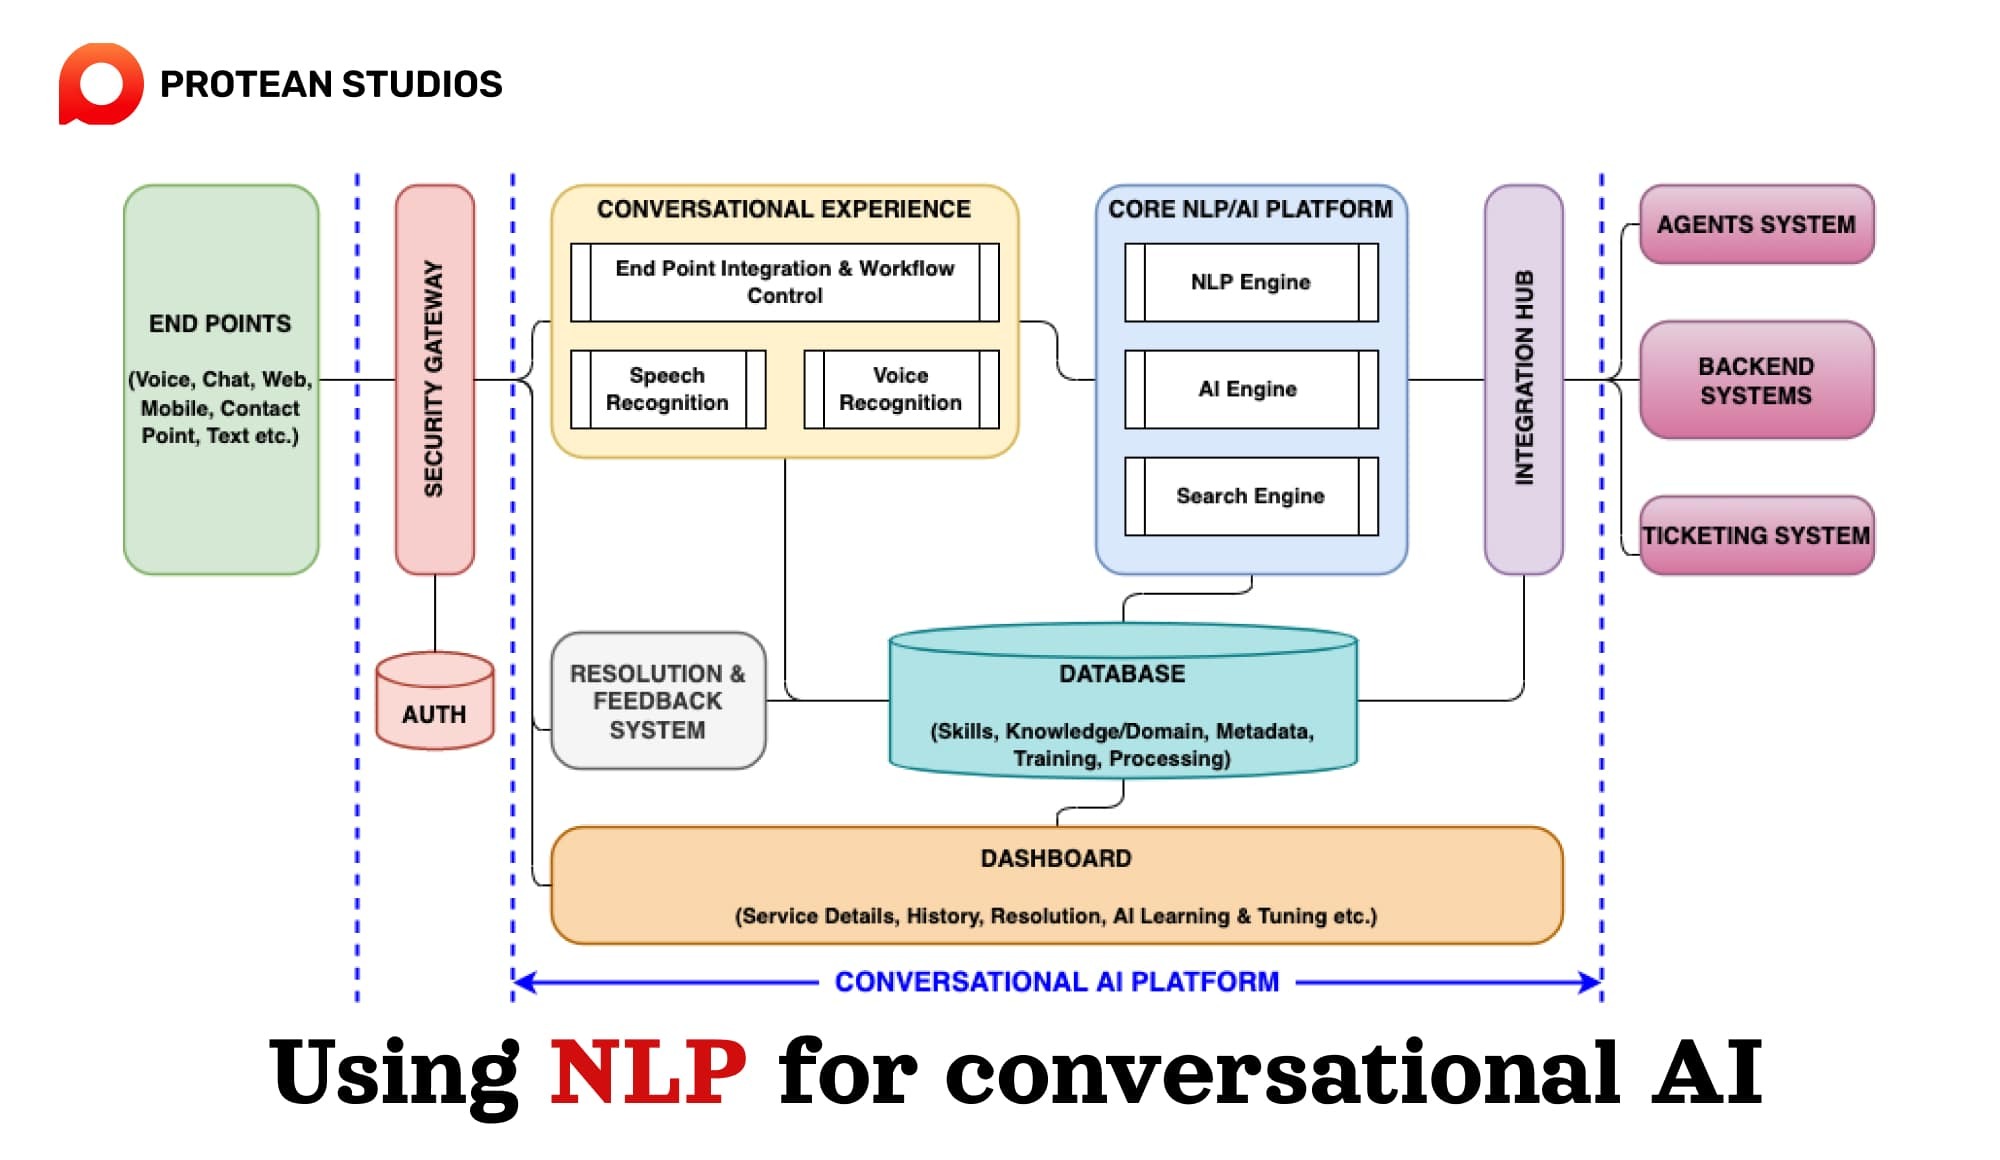 Active process of NLP